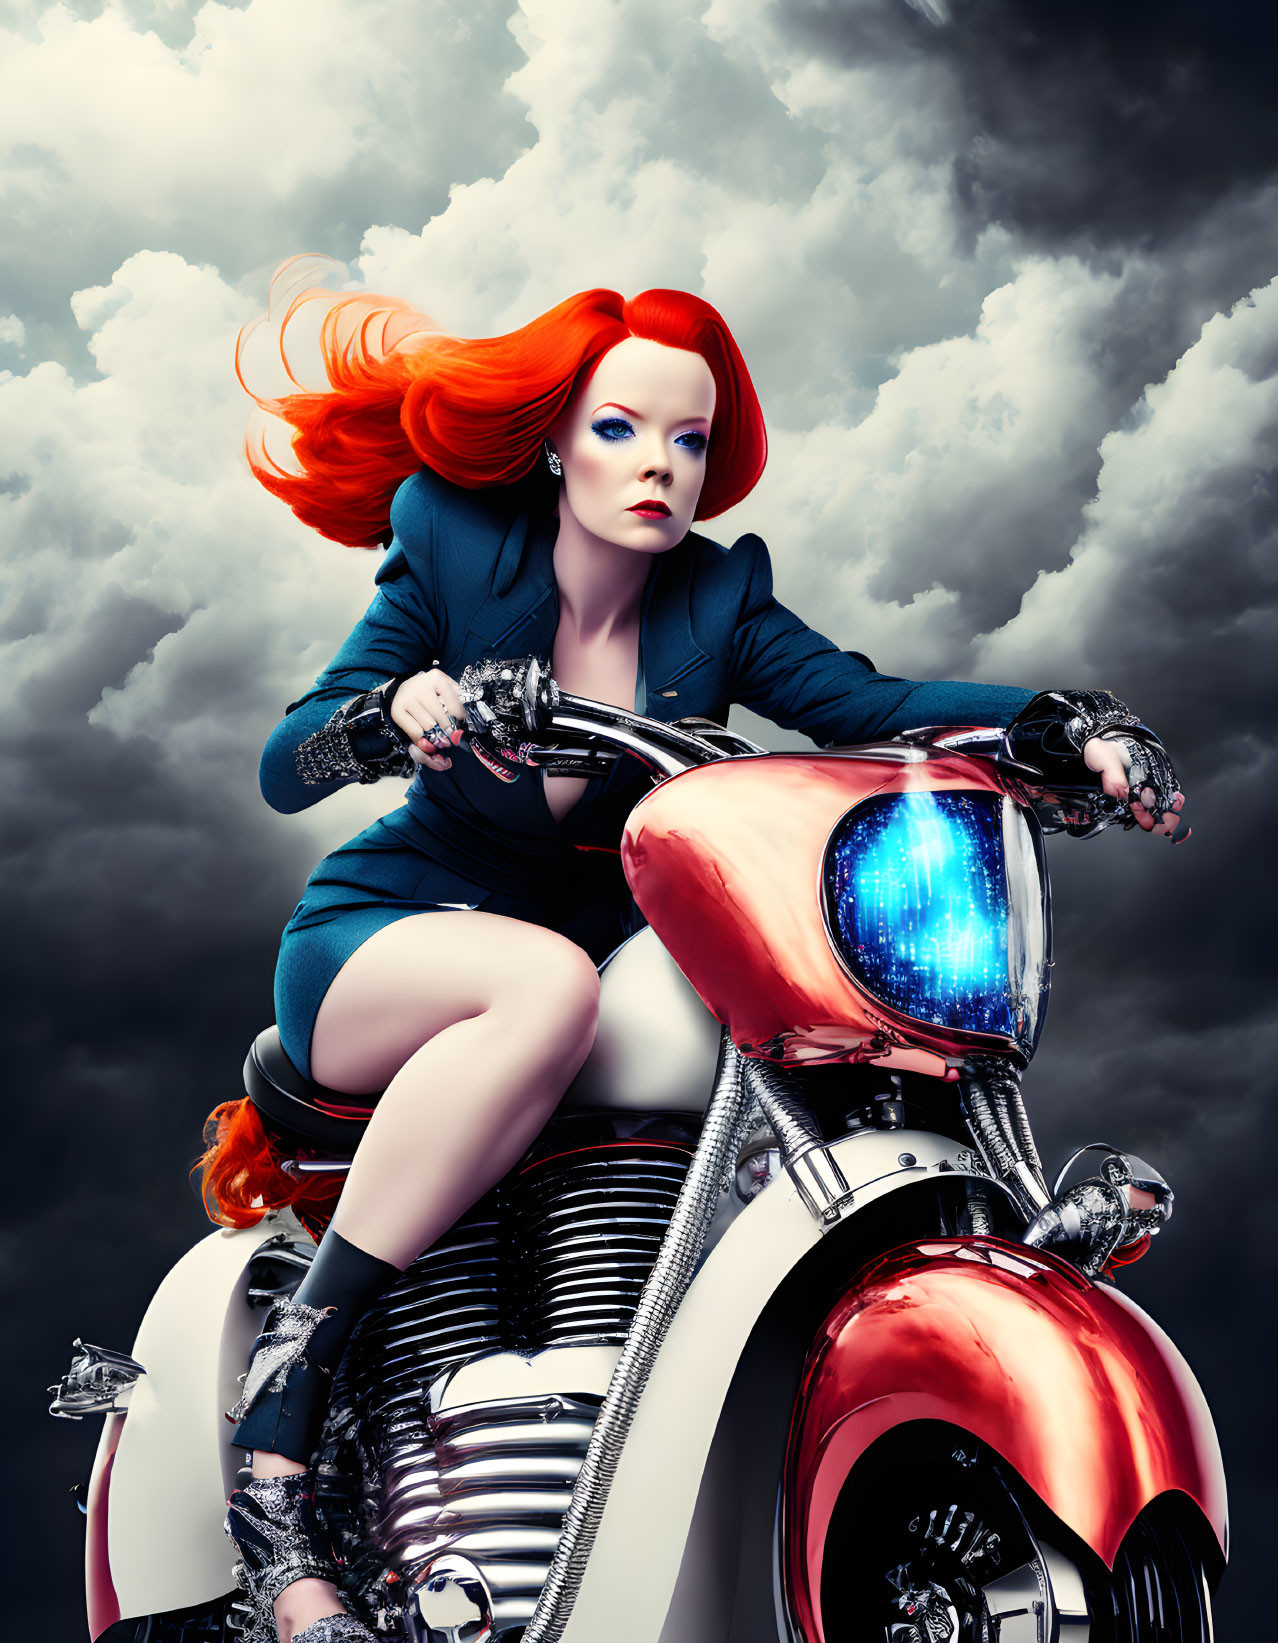 Red-haired woman on classic motorcycle under stormy sky